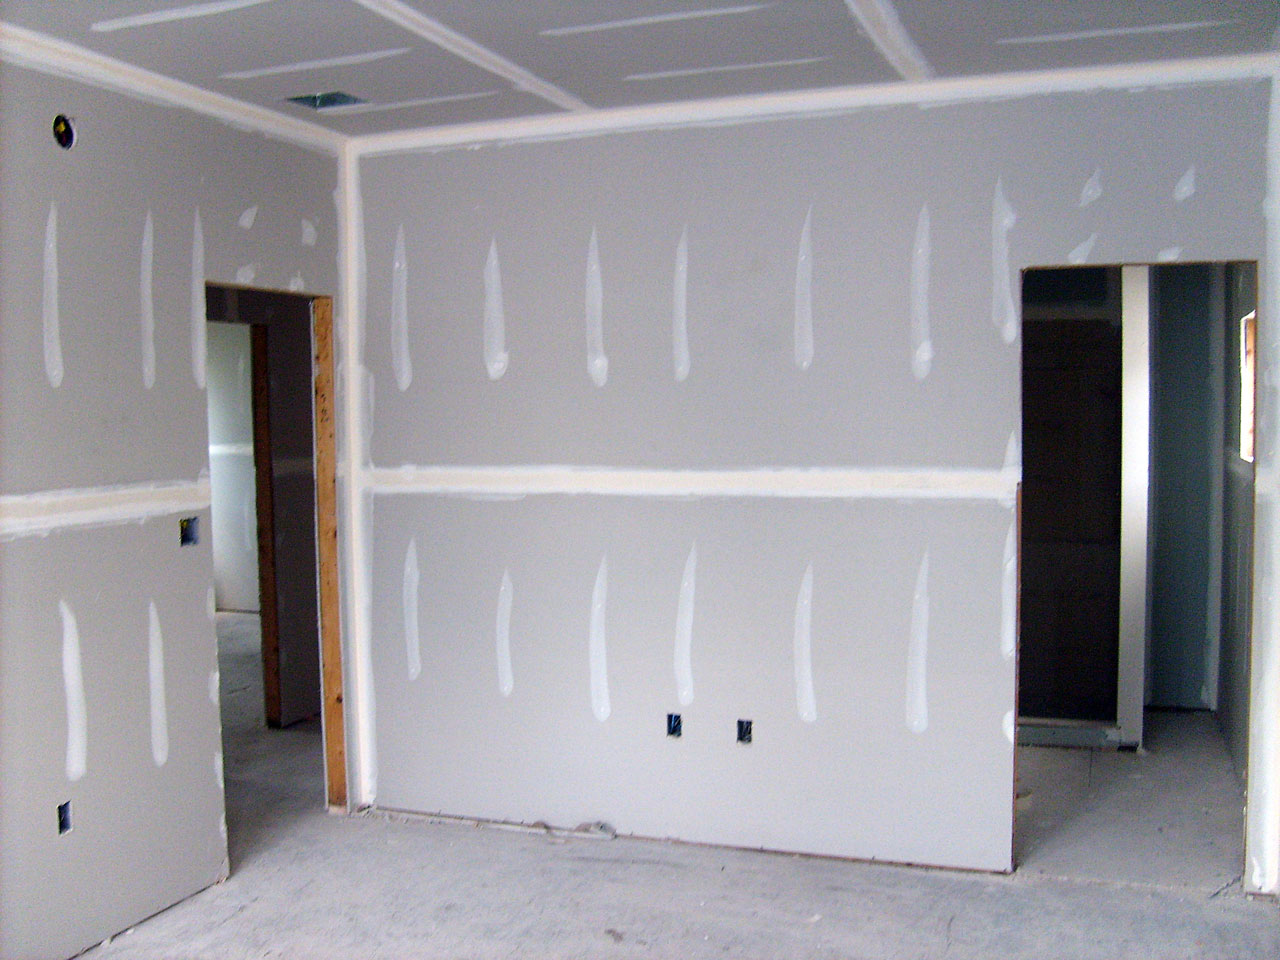 Union County Sheetrock Contractor